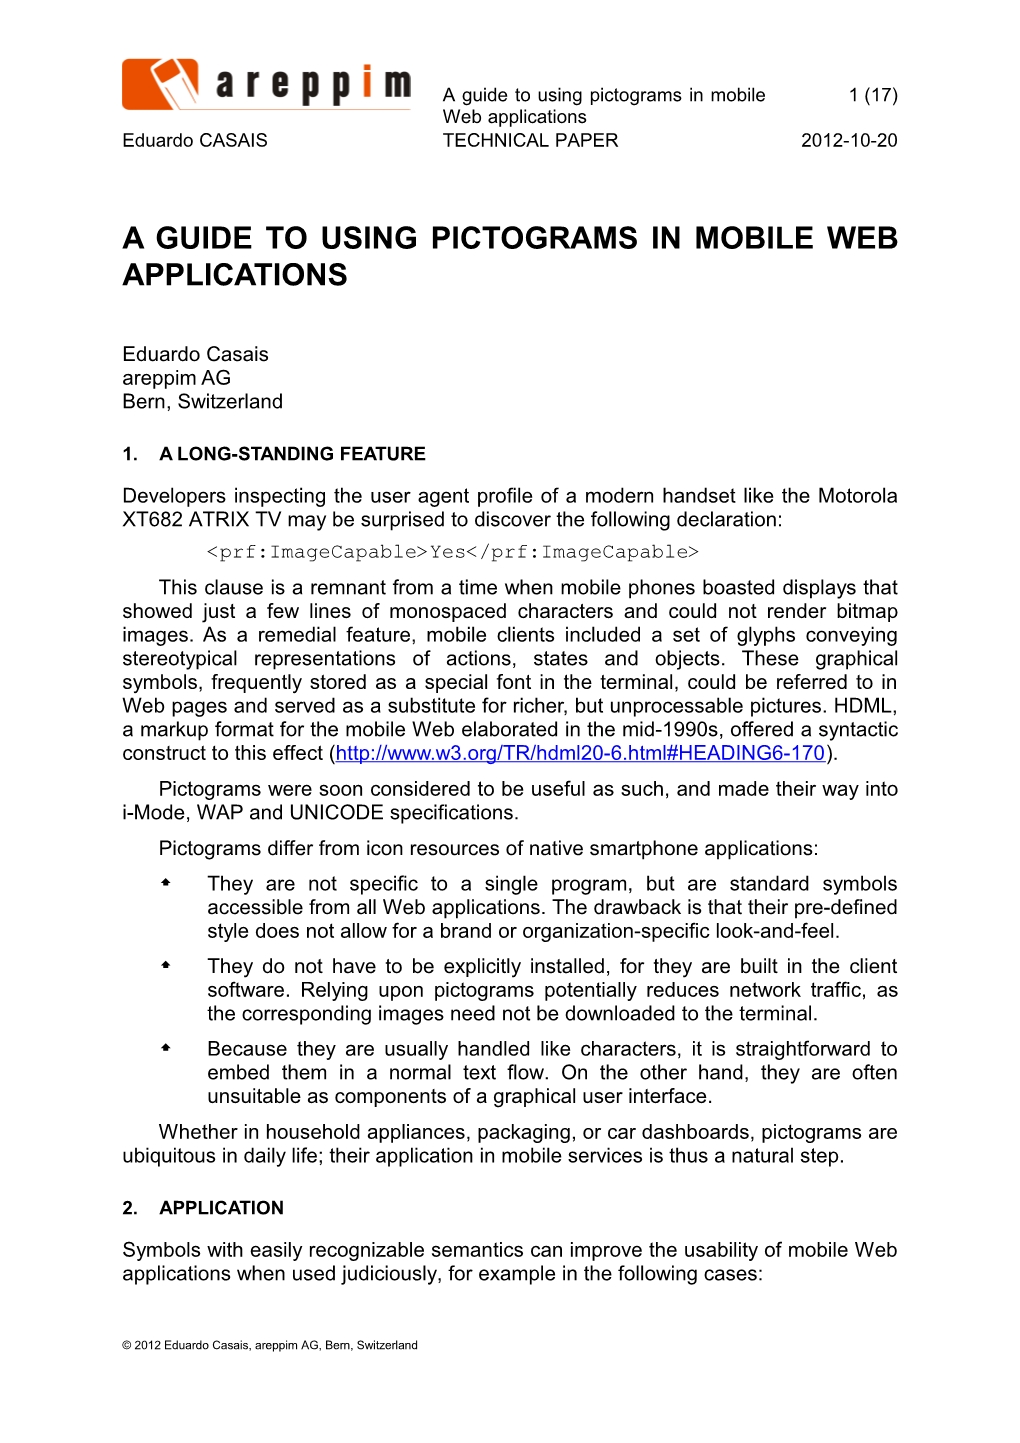 A Guide to Using Pictograms in Mobile Web Applications